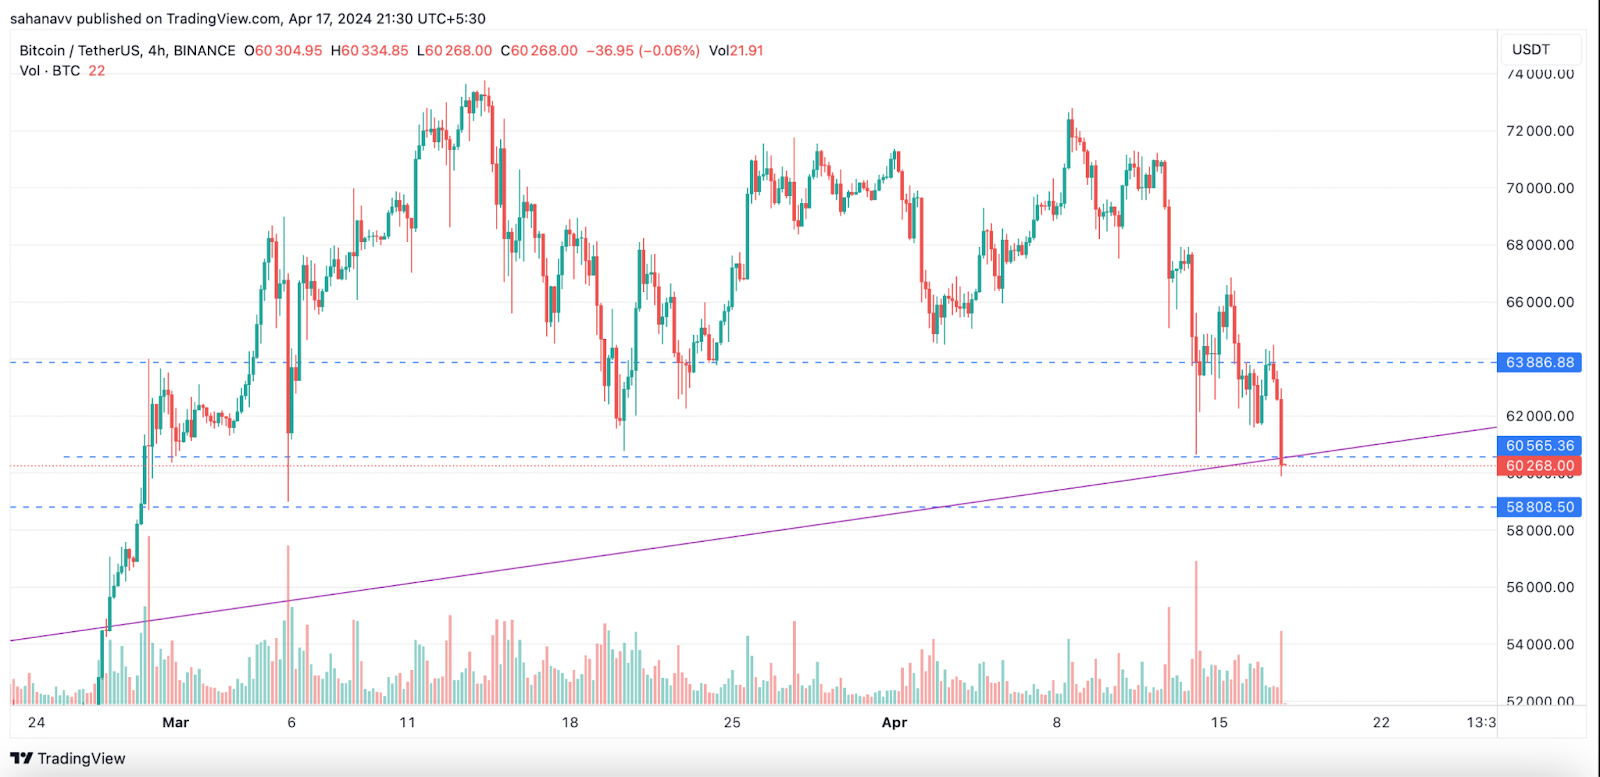 The Crypto Correction Has Just Intensified: Bitcoin (BTC) Price Tumbles Close to ,000